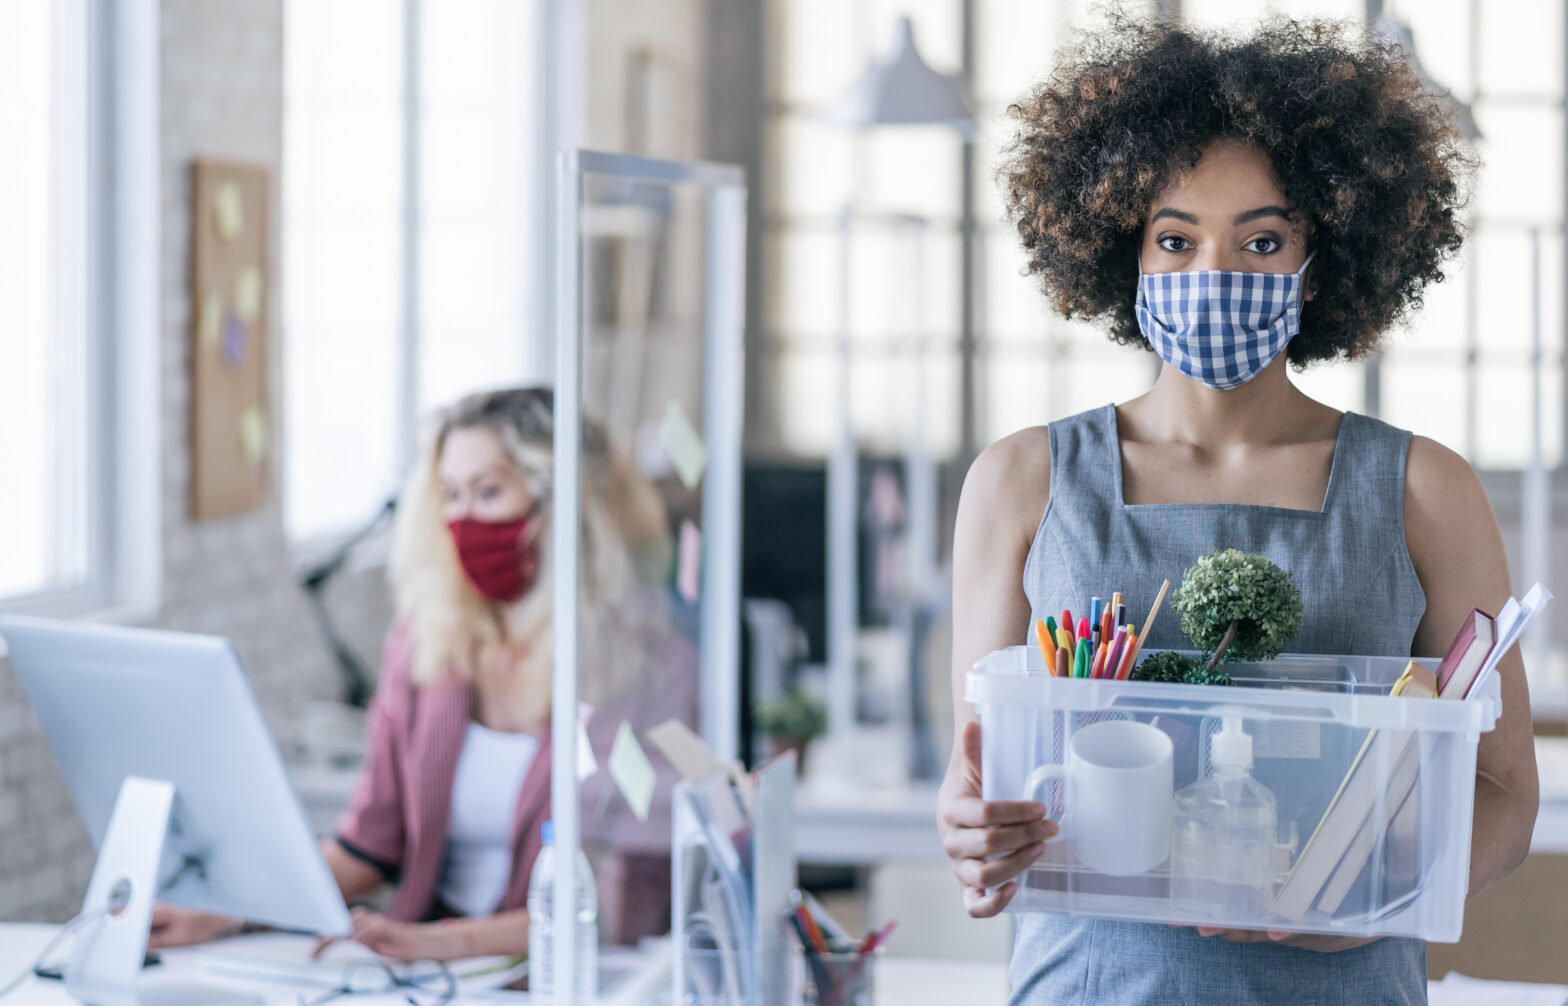 Businesswoman with protective face mask quits job due to limiting workplaces in office, during Covid-19